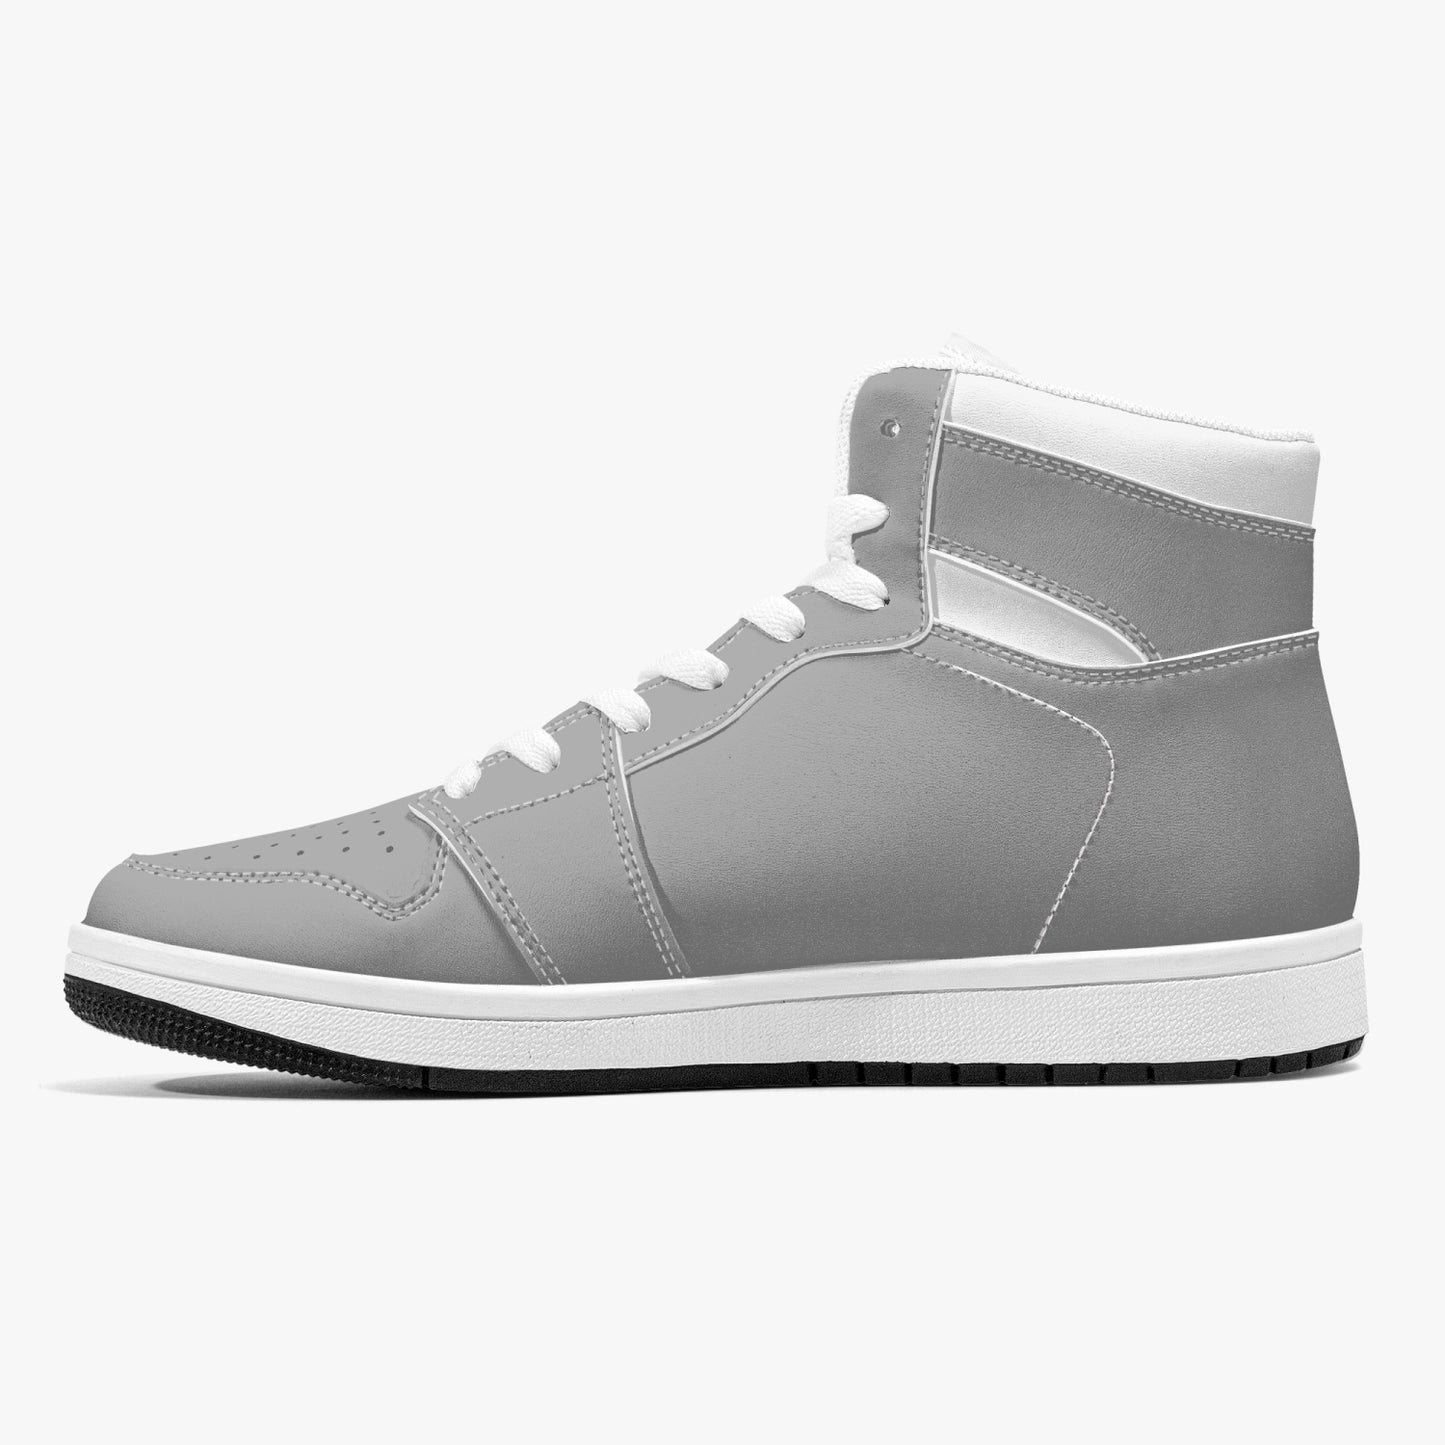 CIRCUITO MIKE G - High-Top Leather Sneakers - Titanium